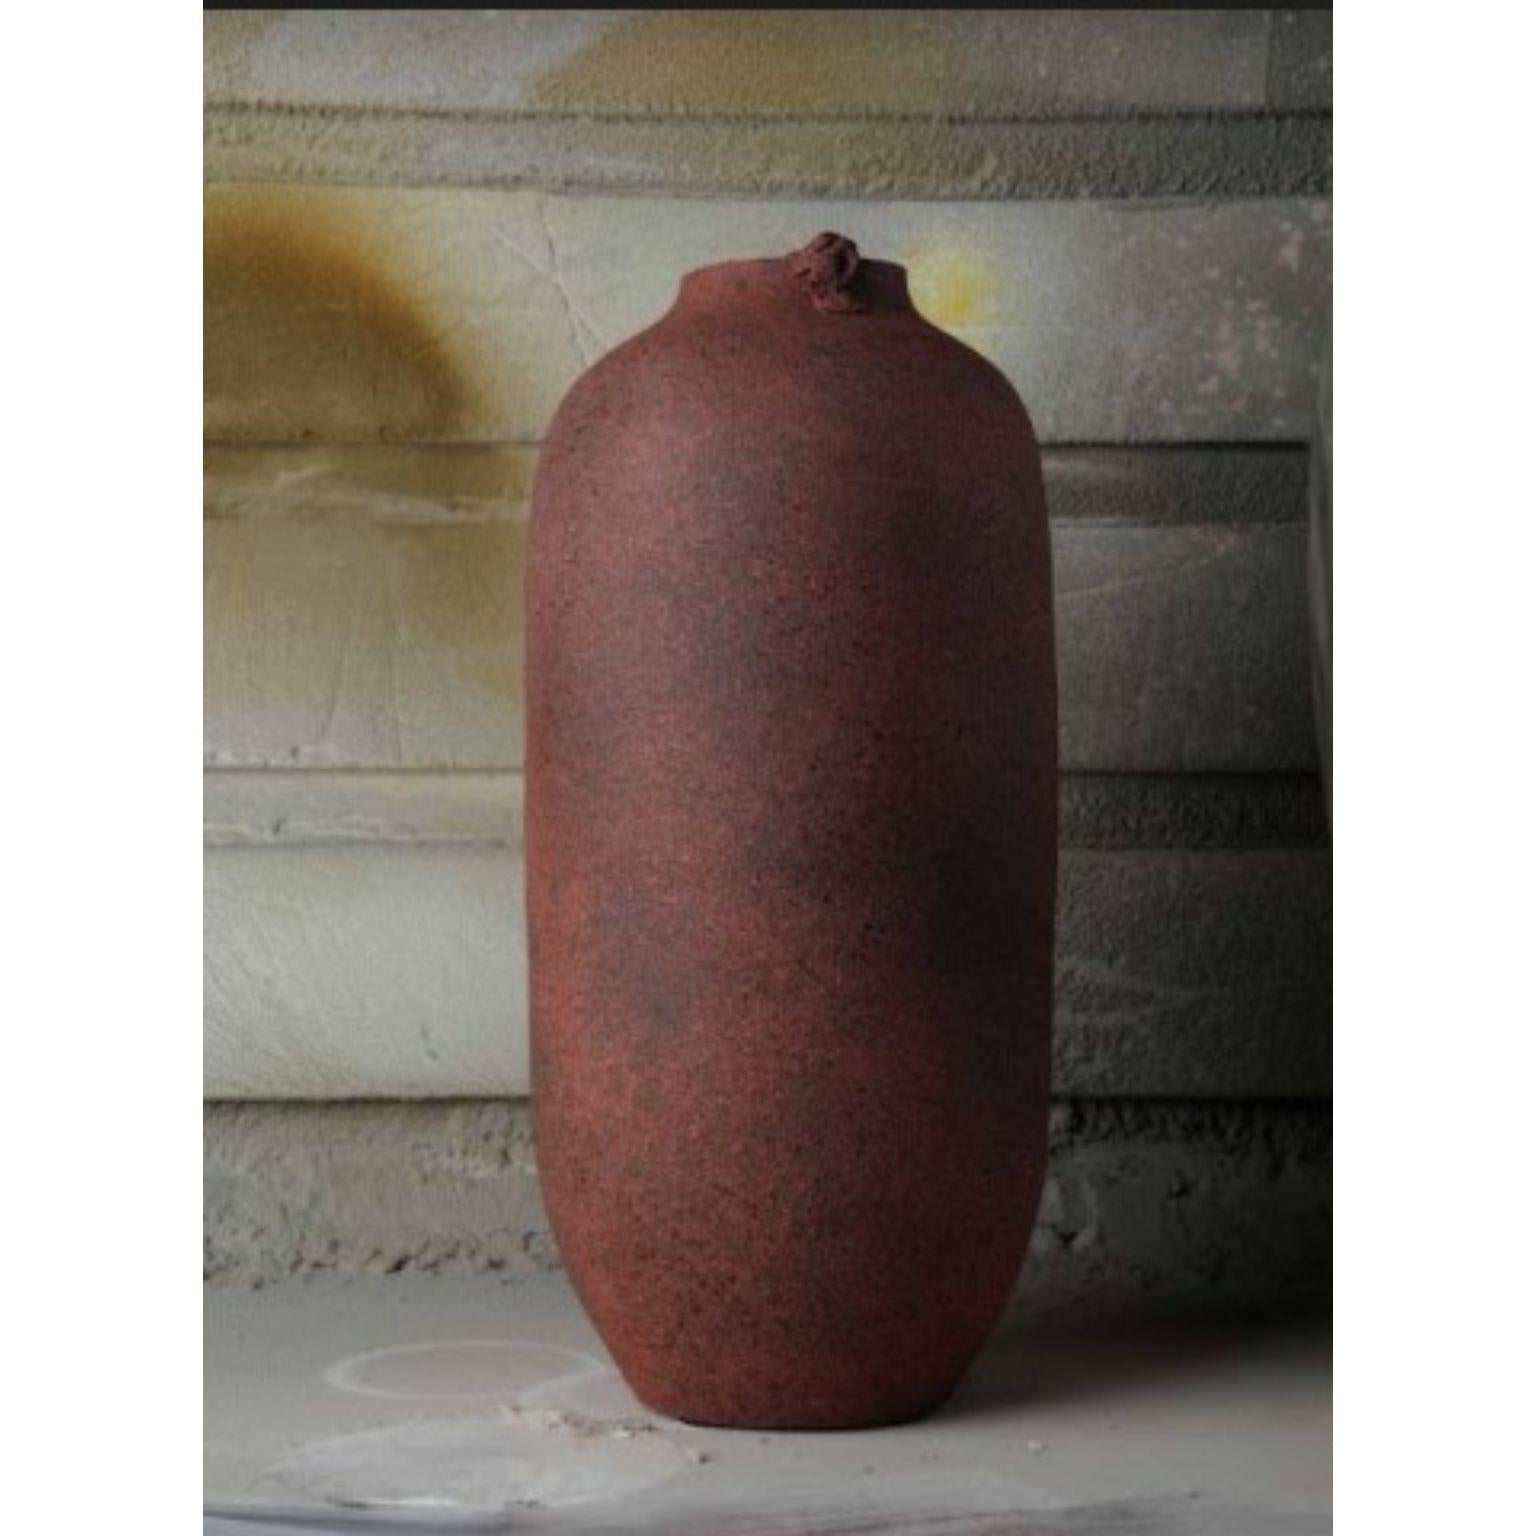 Maxi Vases red vase by Roman Sedina
Dimensions: D24cm x H 60 cm
Materials: Porcelain

Roman Sedina comes from artistic background of South Bohemian (European Region) town Bechyne – town famous as ceramic centre of the postwar period. Range of